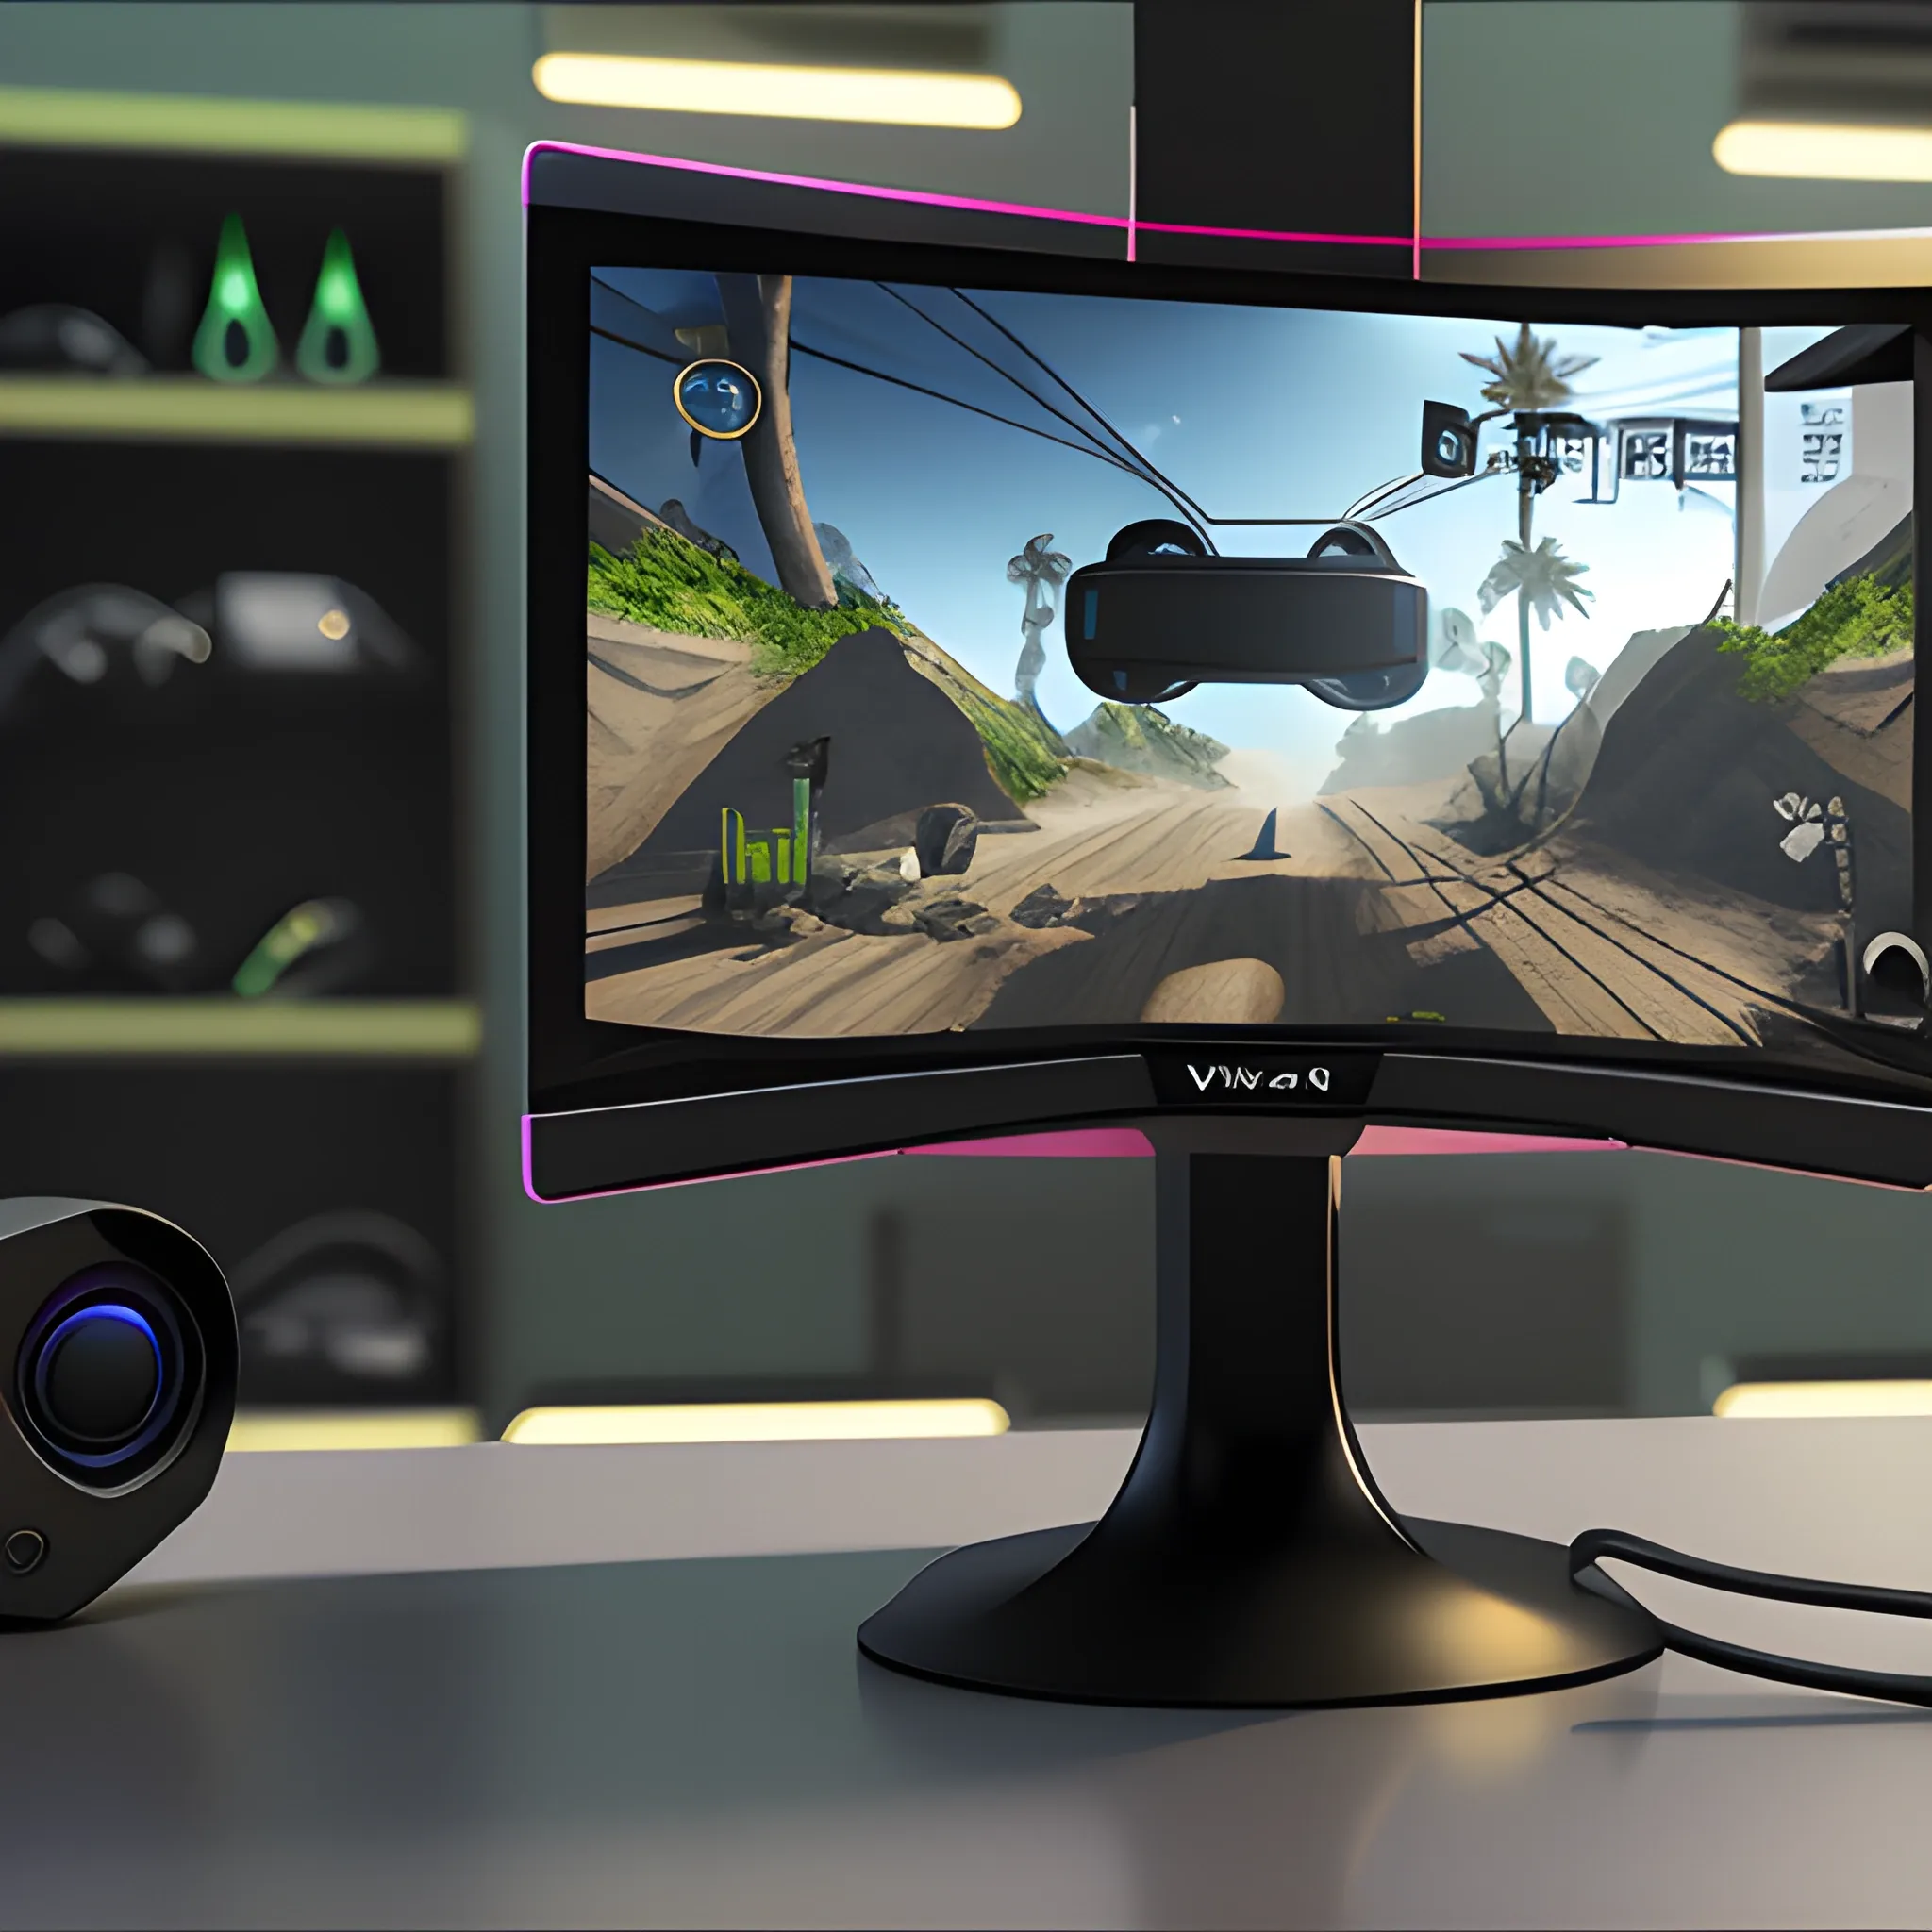 virtual reality headsets, inside a pc game, 3D